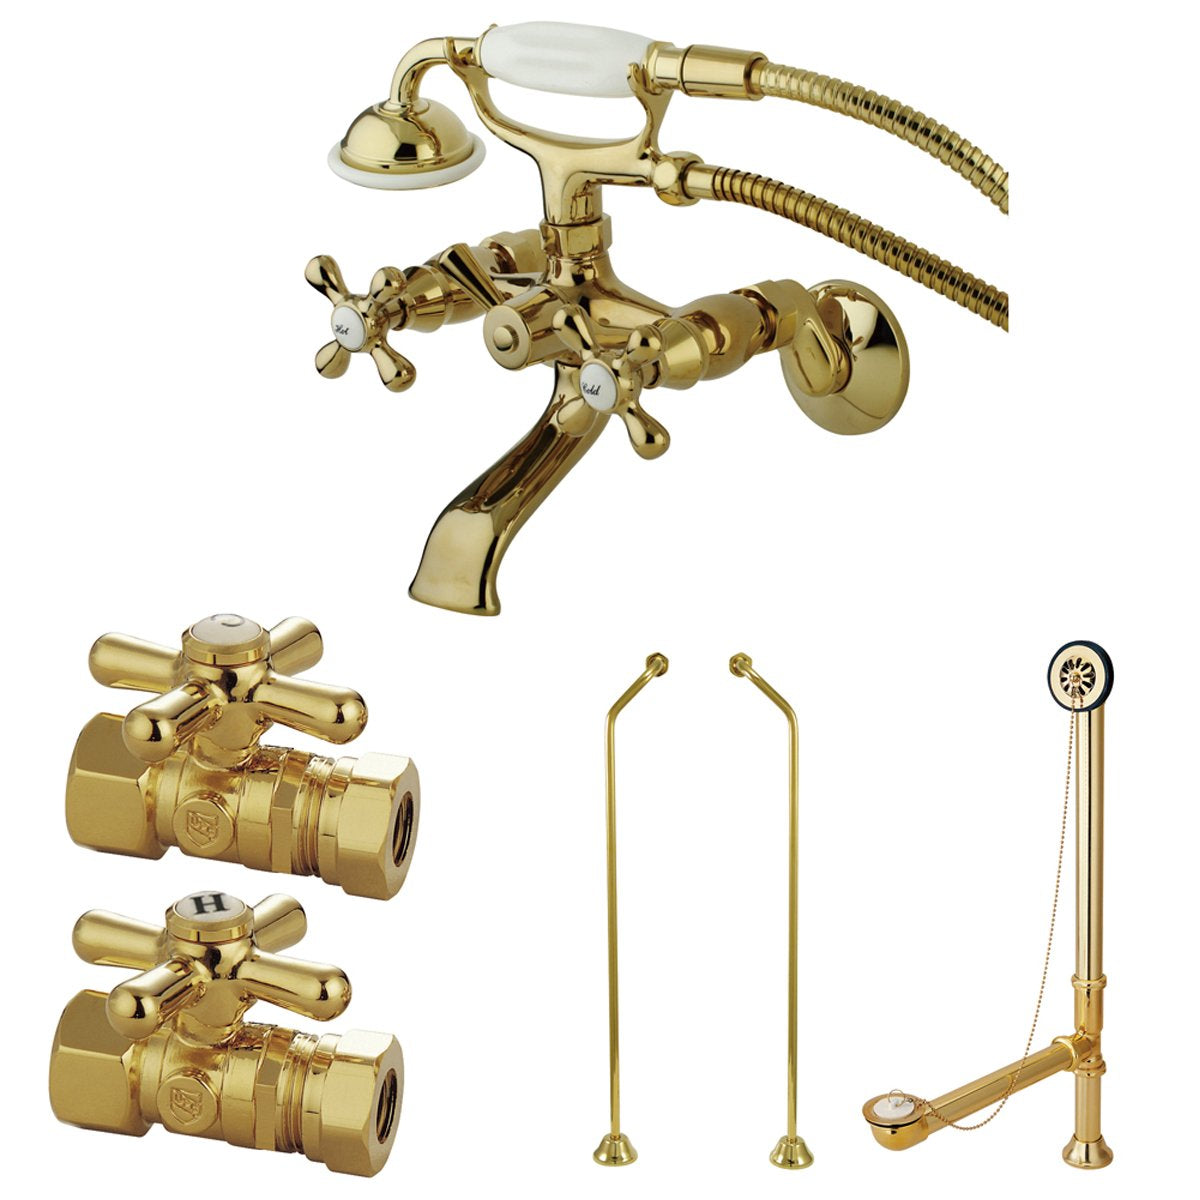 Kingston Brass Vintage Wall Mount Clawfoot Tub Faucet Package with Offset Supply Lines-Tub Faucets-Free Shipping-Directsinks.